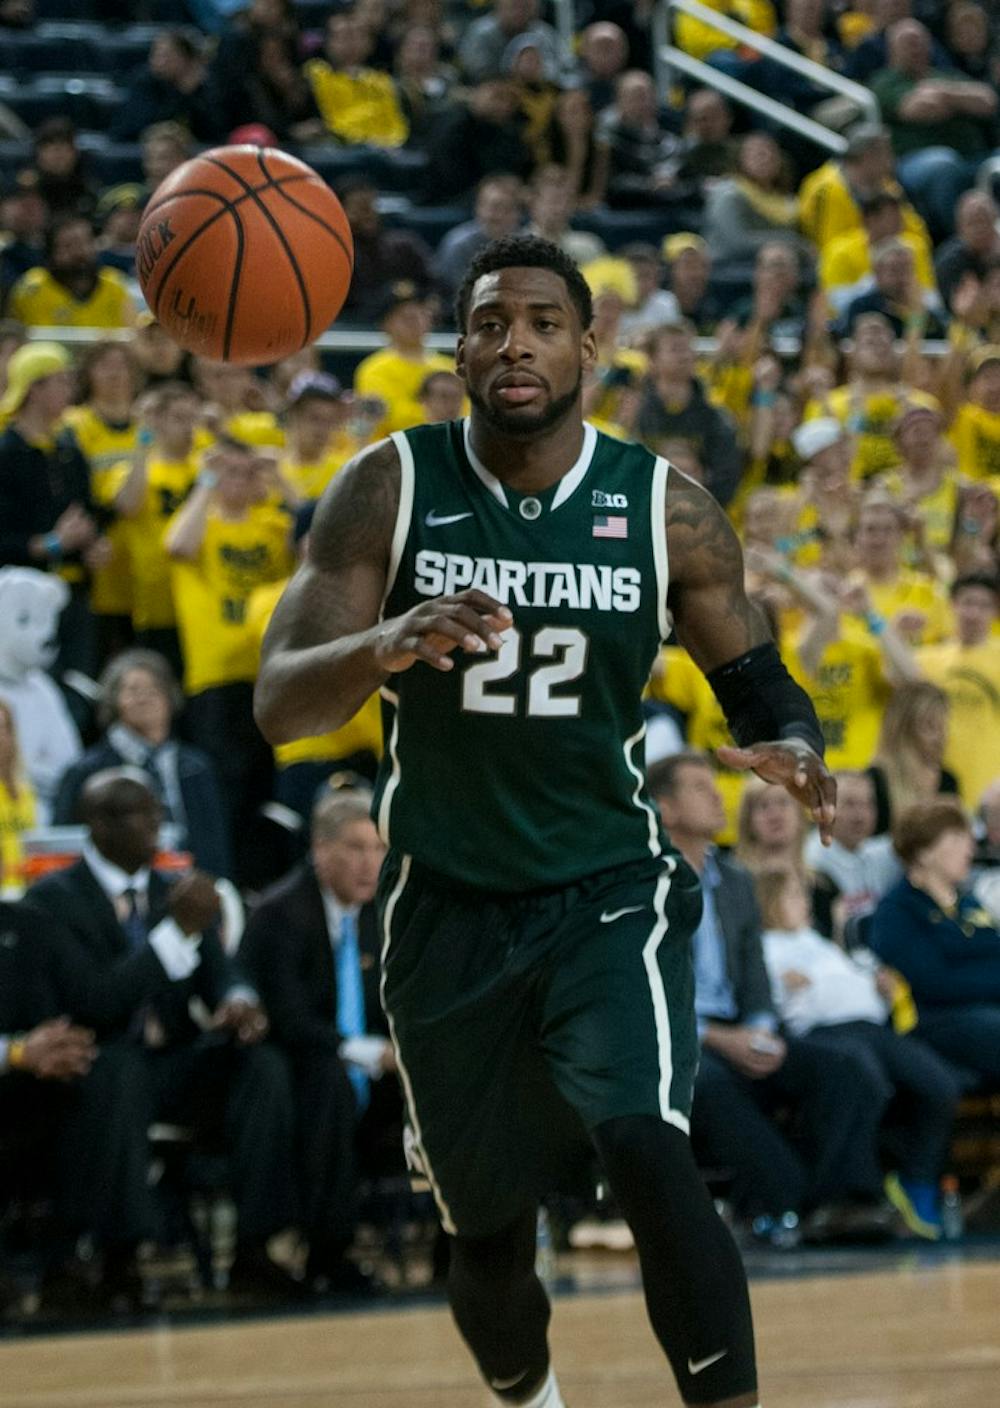 <p>Senior guard/forward Branden Dawson goes for the ball Feb. 17, 2015, during the game against Michigan at Crisler Center in Ann Arbor. The Spartans defeated the Wolverines, 80-67. Hannah Levy/The State News</p>